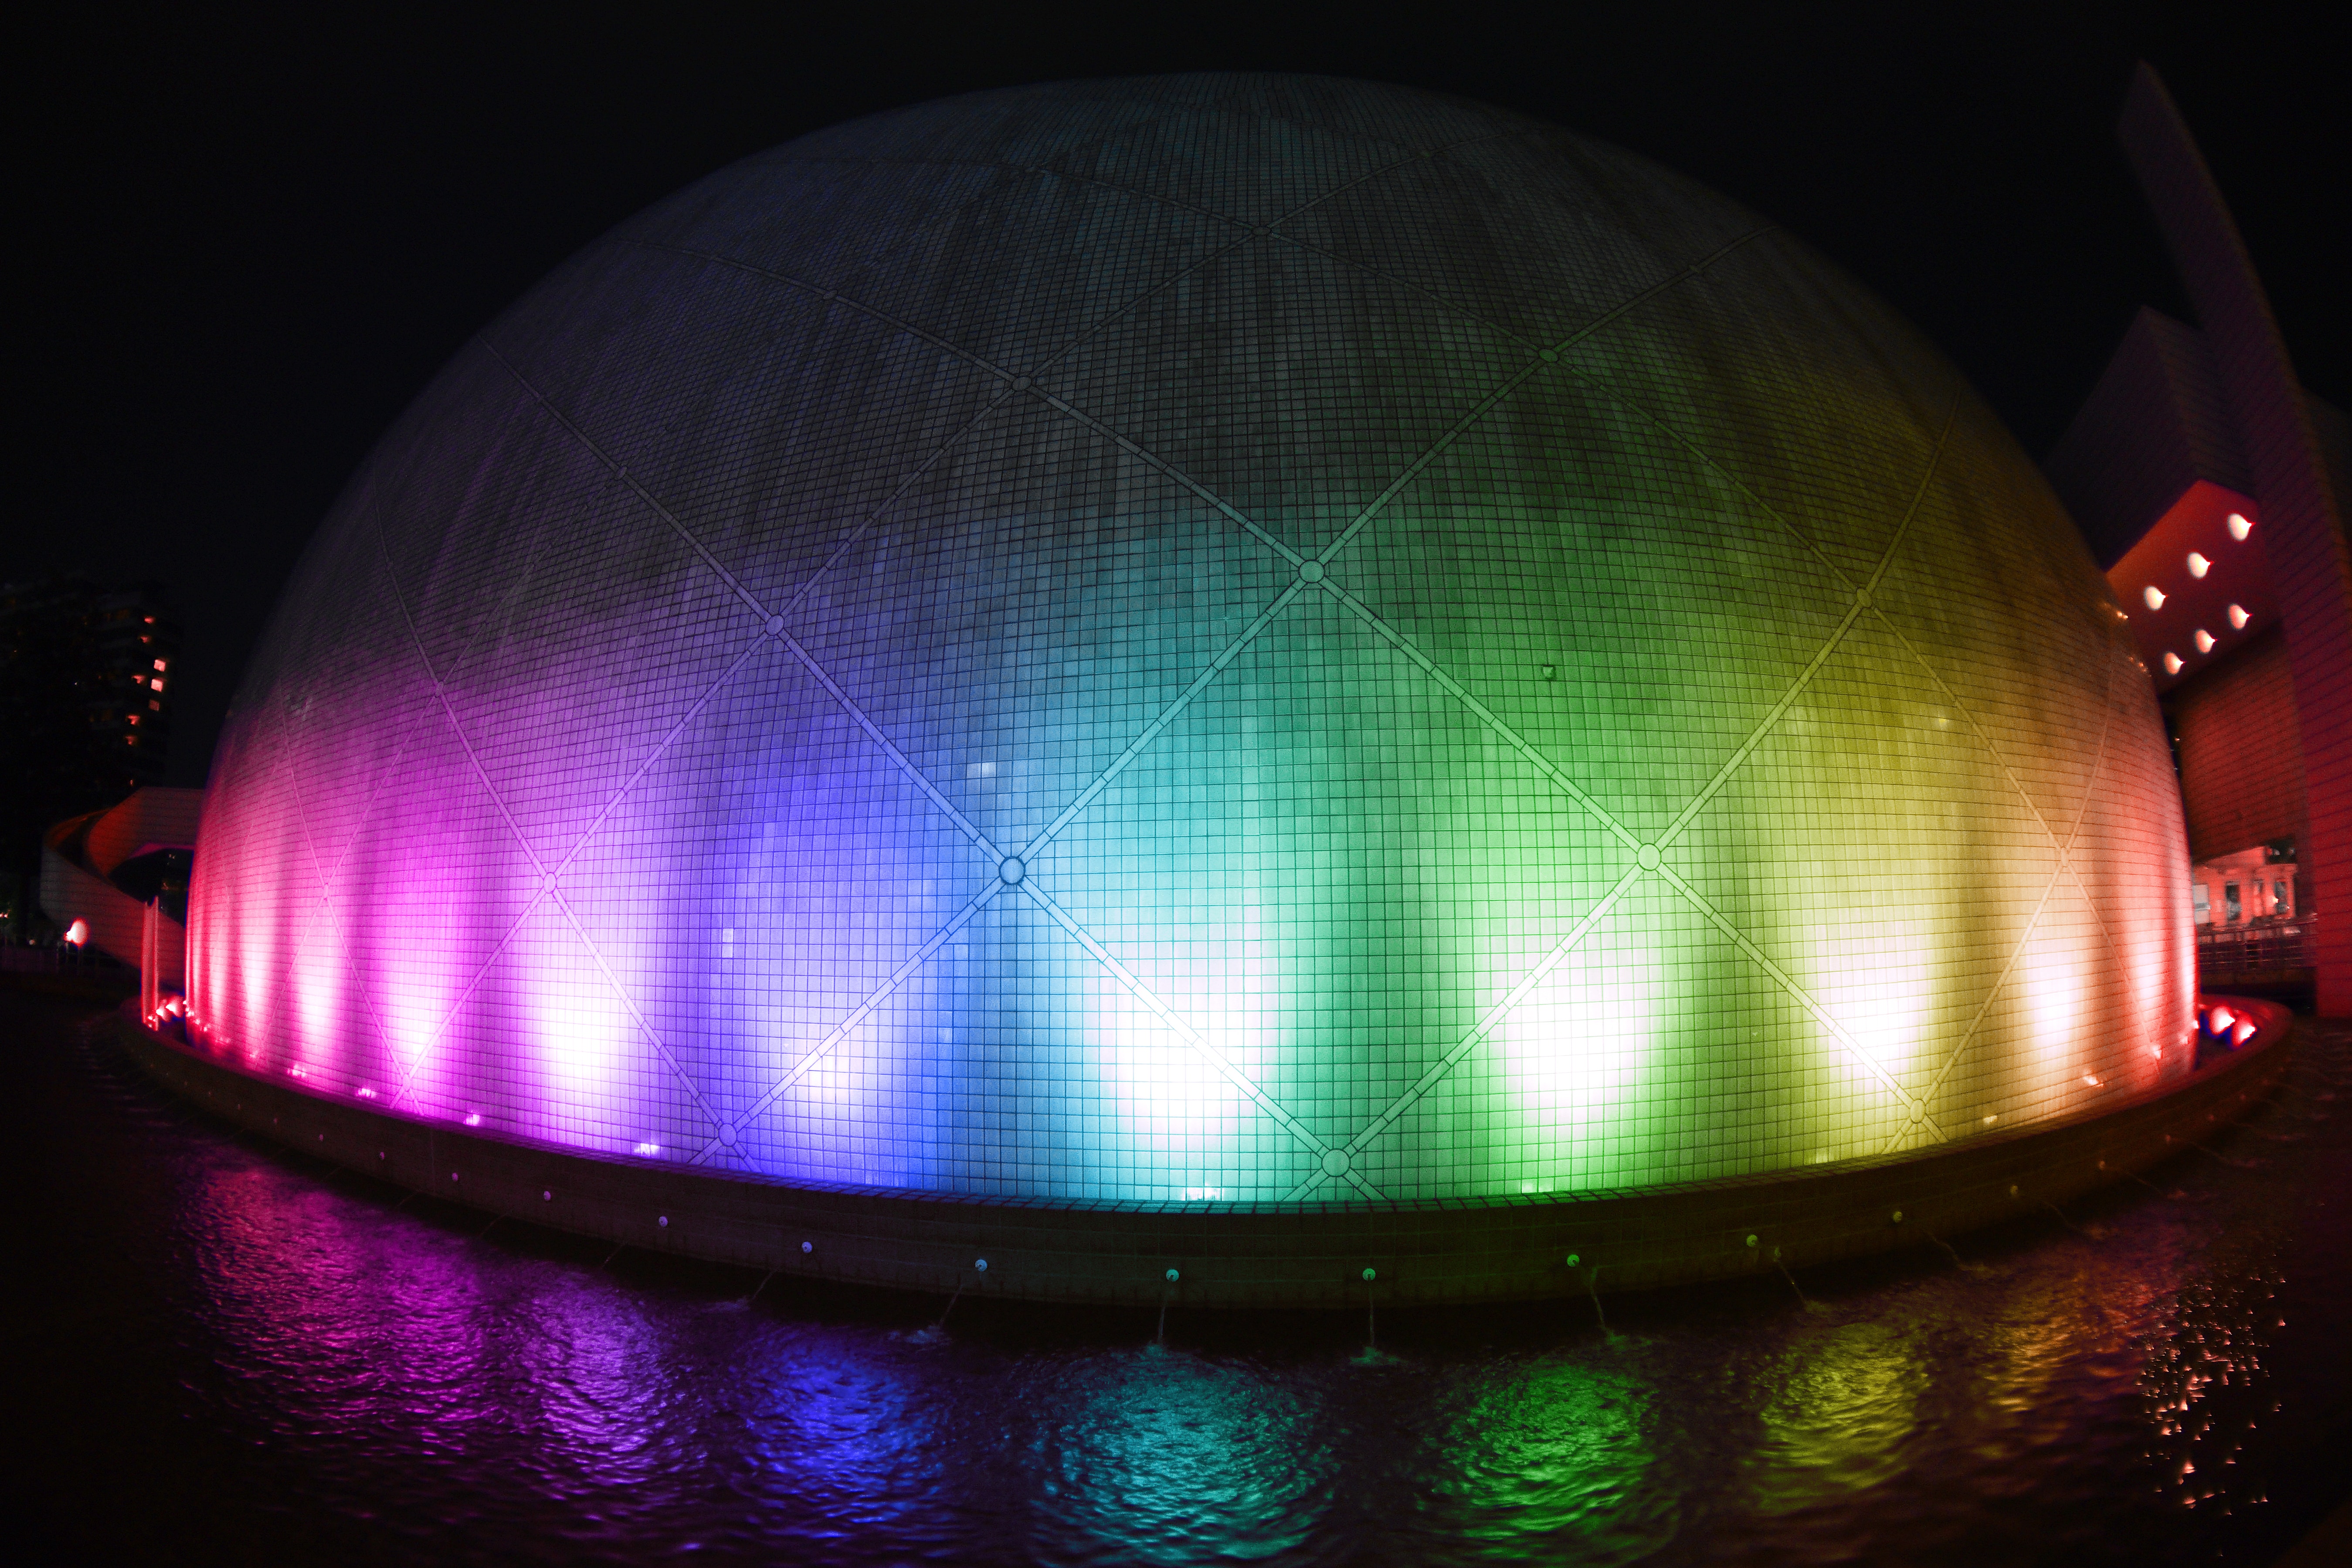 Turned on Multicolored Led Lights, Ball-shaped, Blur, Close-up, Colorful, HQ Photo